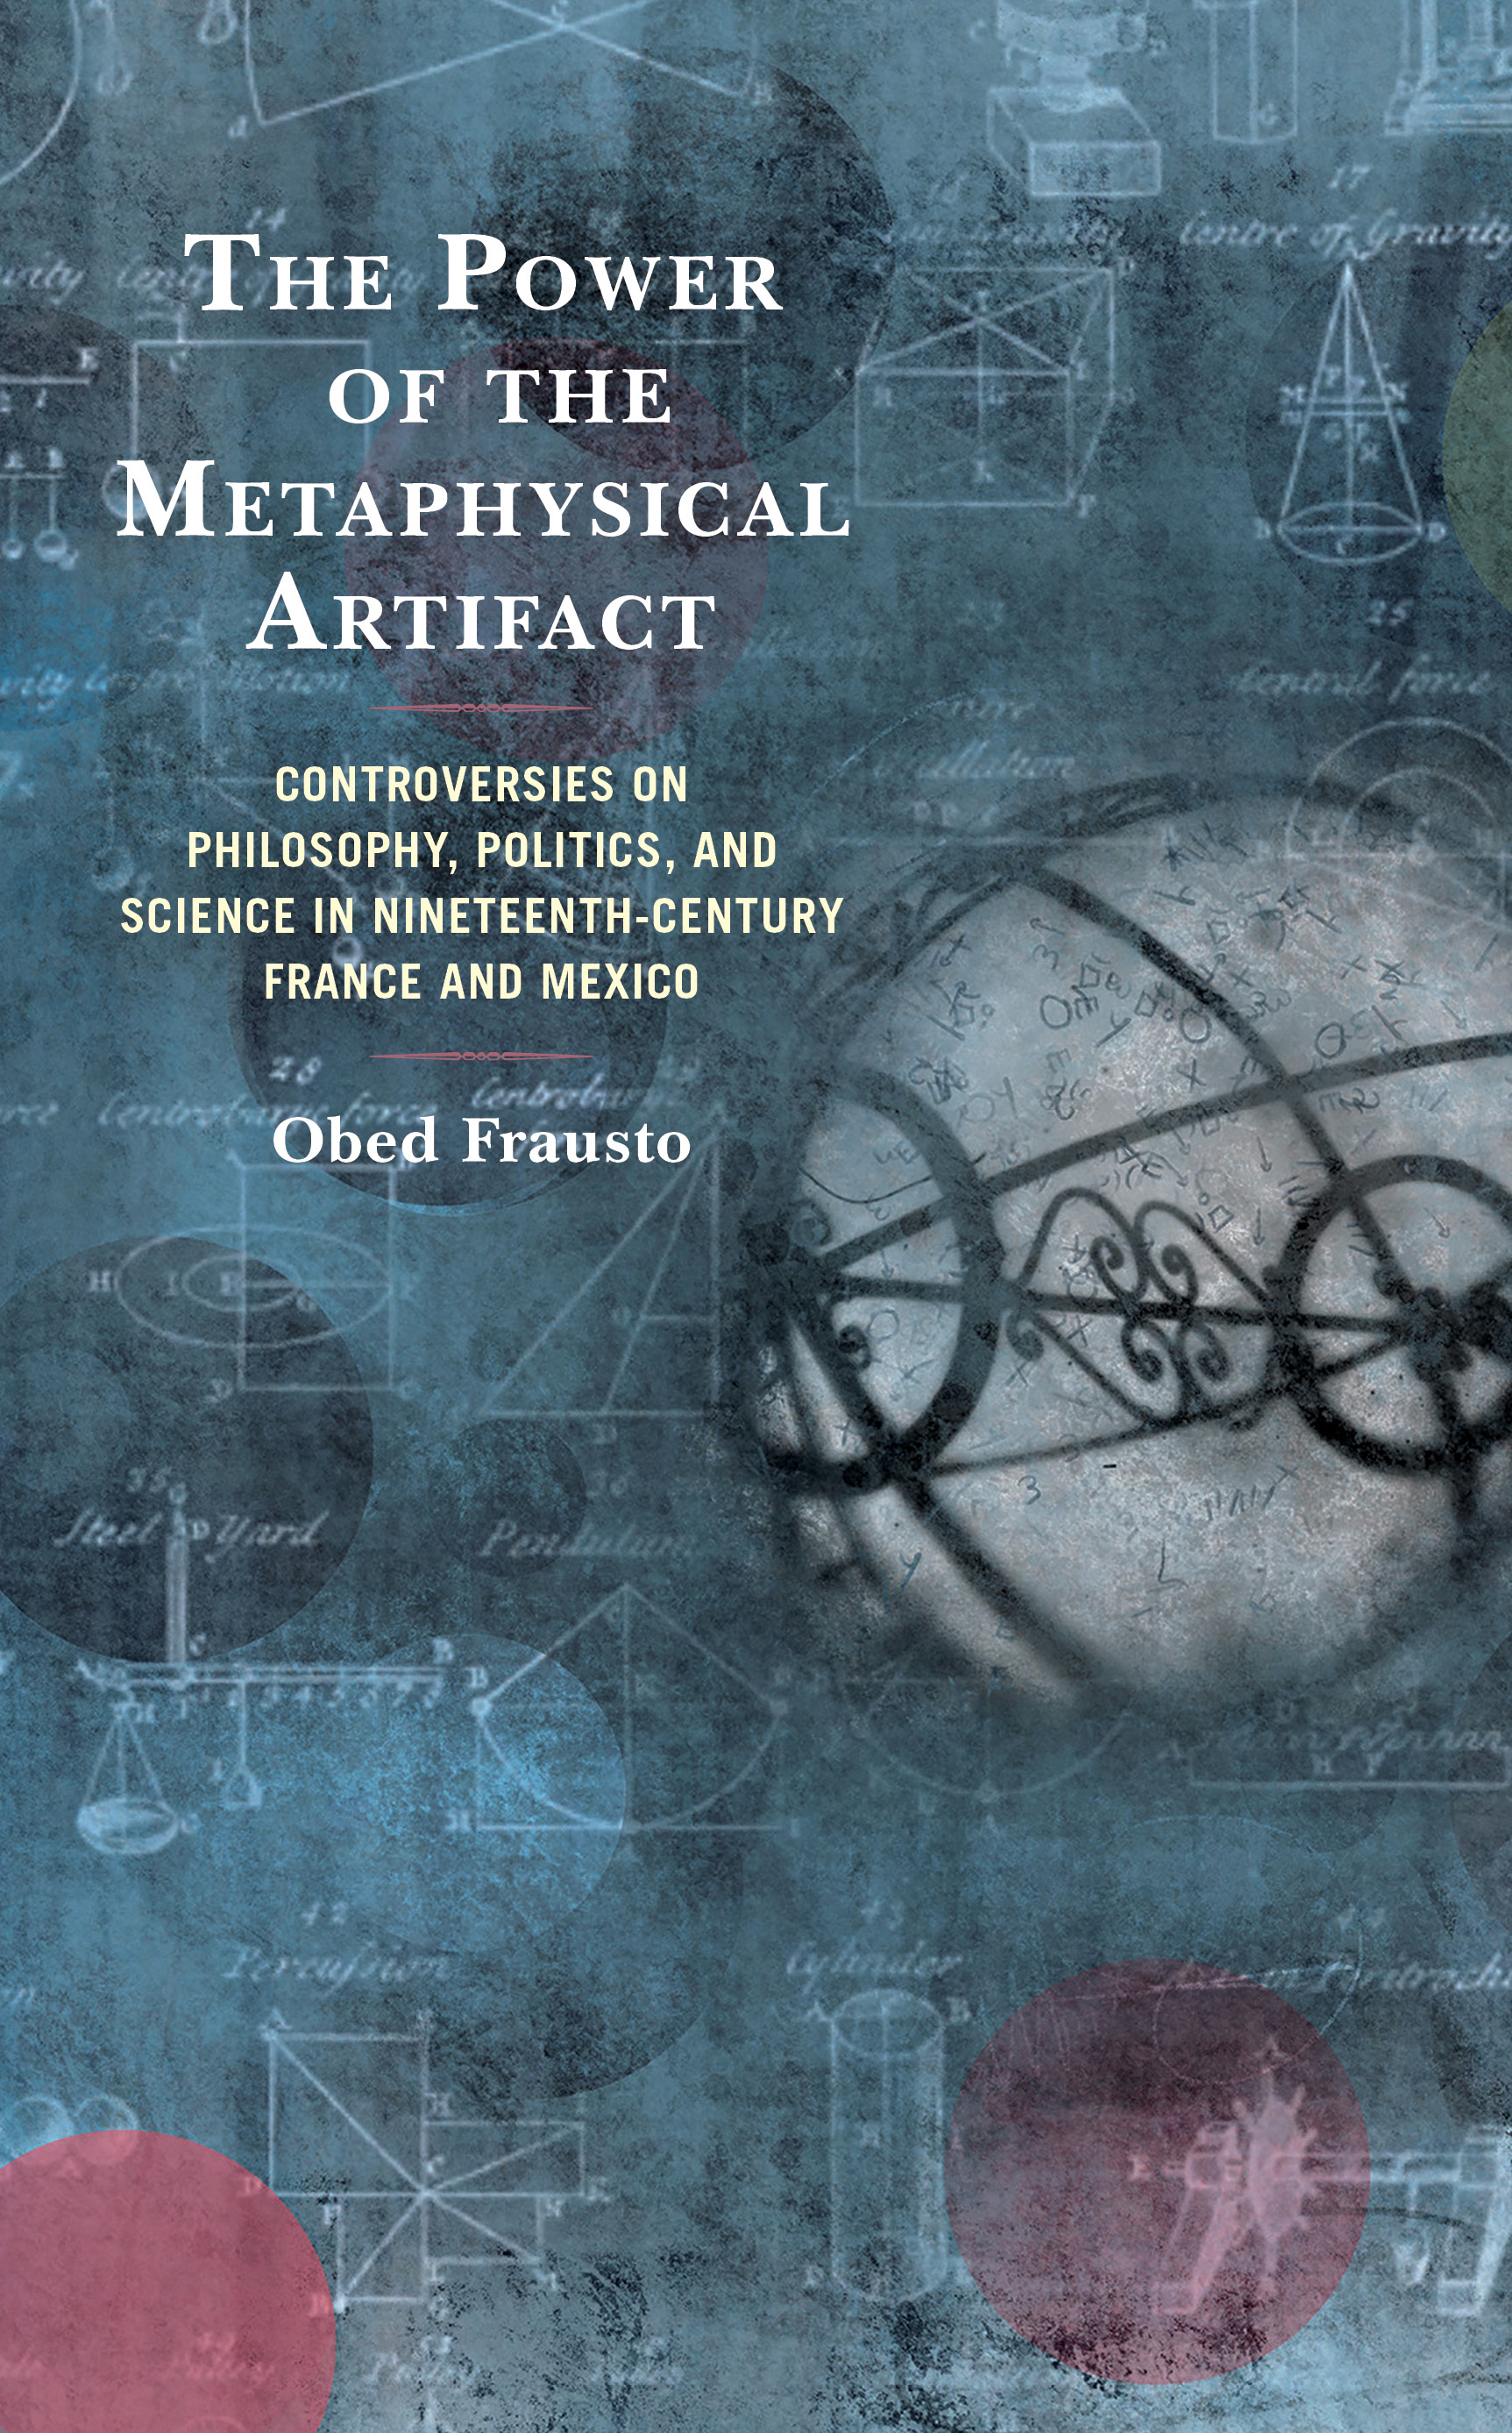 The Power of the Metaphysical Artifact: Controversies on Philosophy, Politics, and Science in Nineteenth-Century France and Mexico